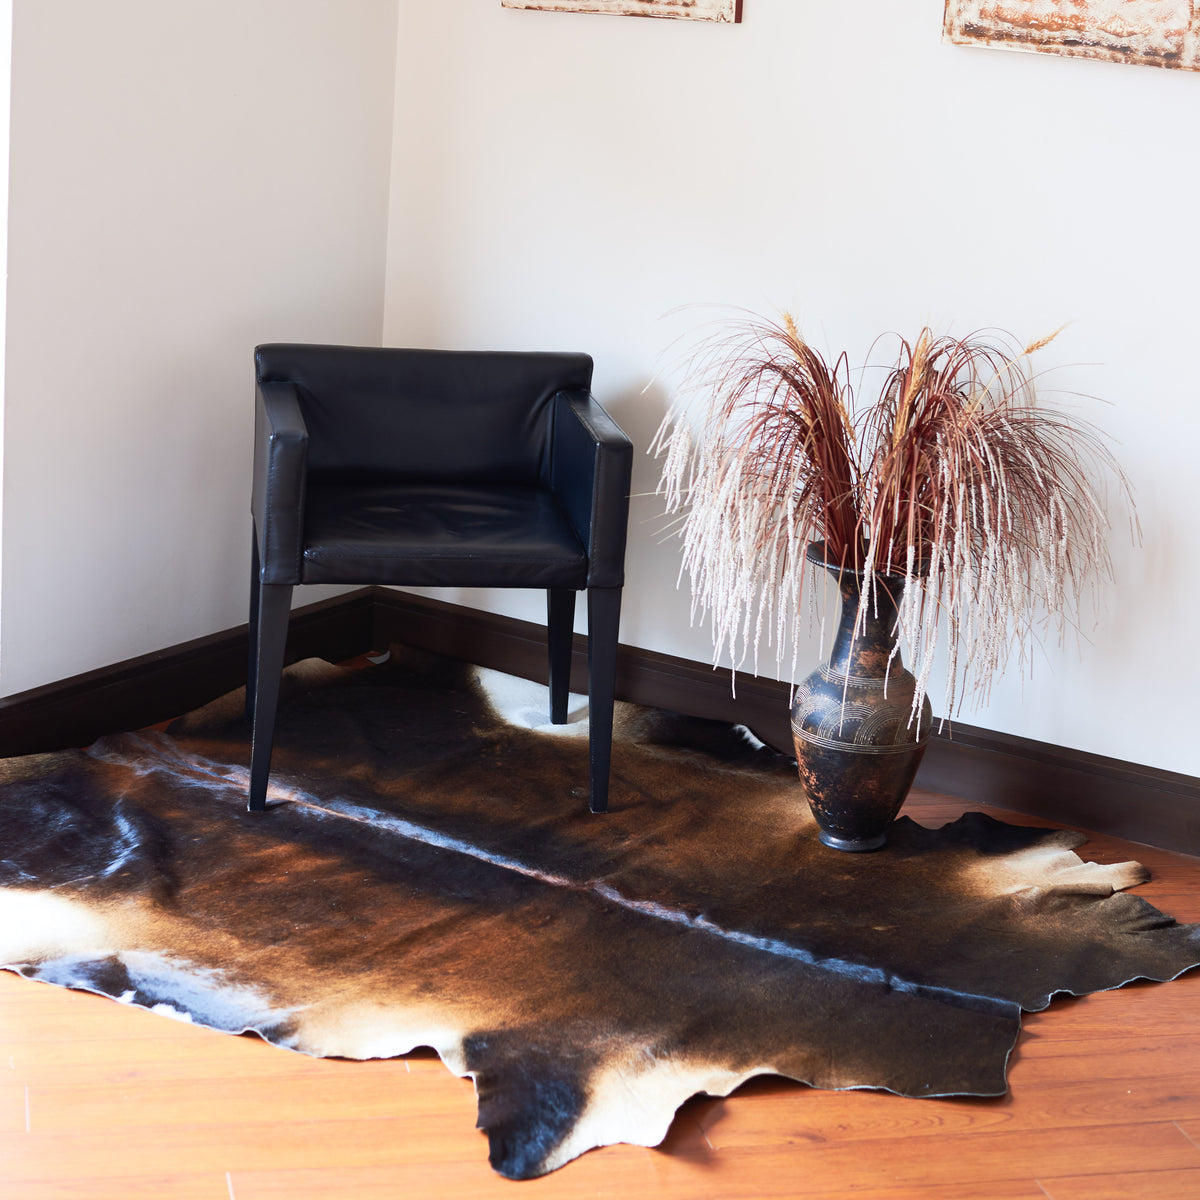 Black and Caramel Large Cowhide Rug, Cowhide Leather Rugs, Home Décor Ideas, Large Rugs, White, Cow hide.Home Hair on hide Floor